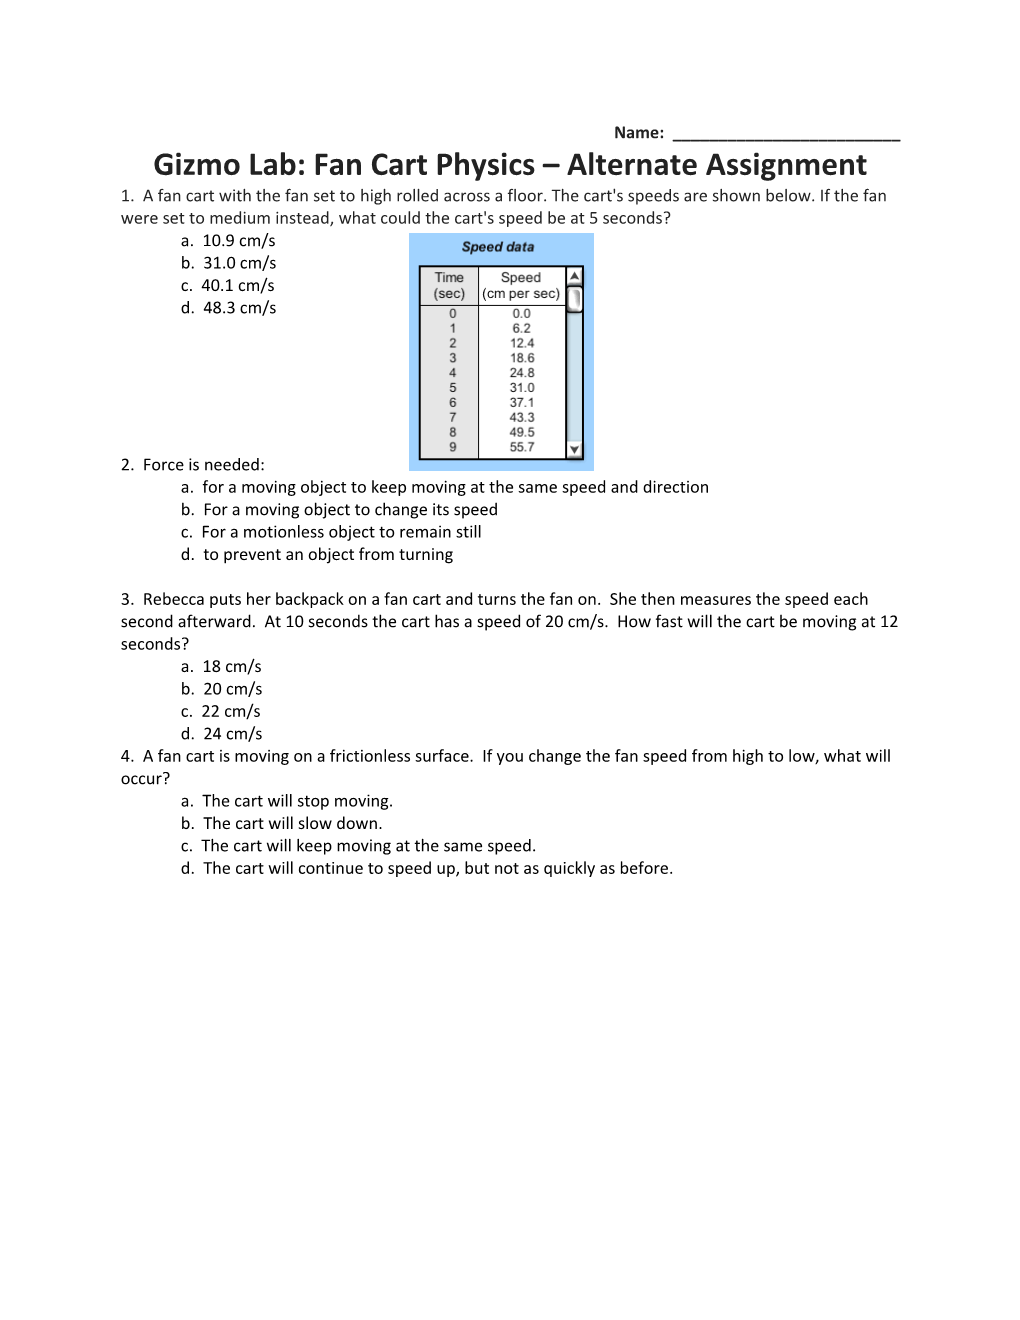 Gizmo Lab: Fan Cart Physics Alternate Assignment